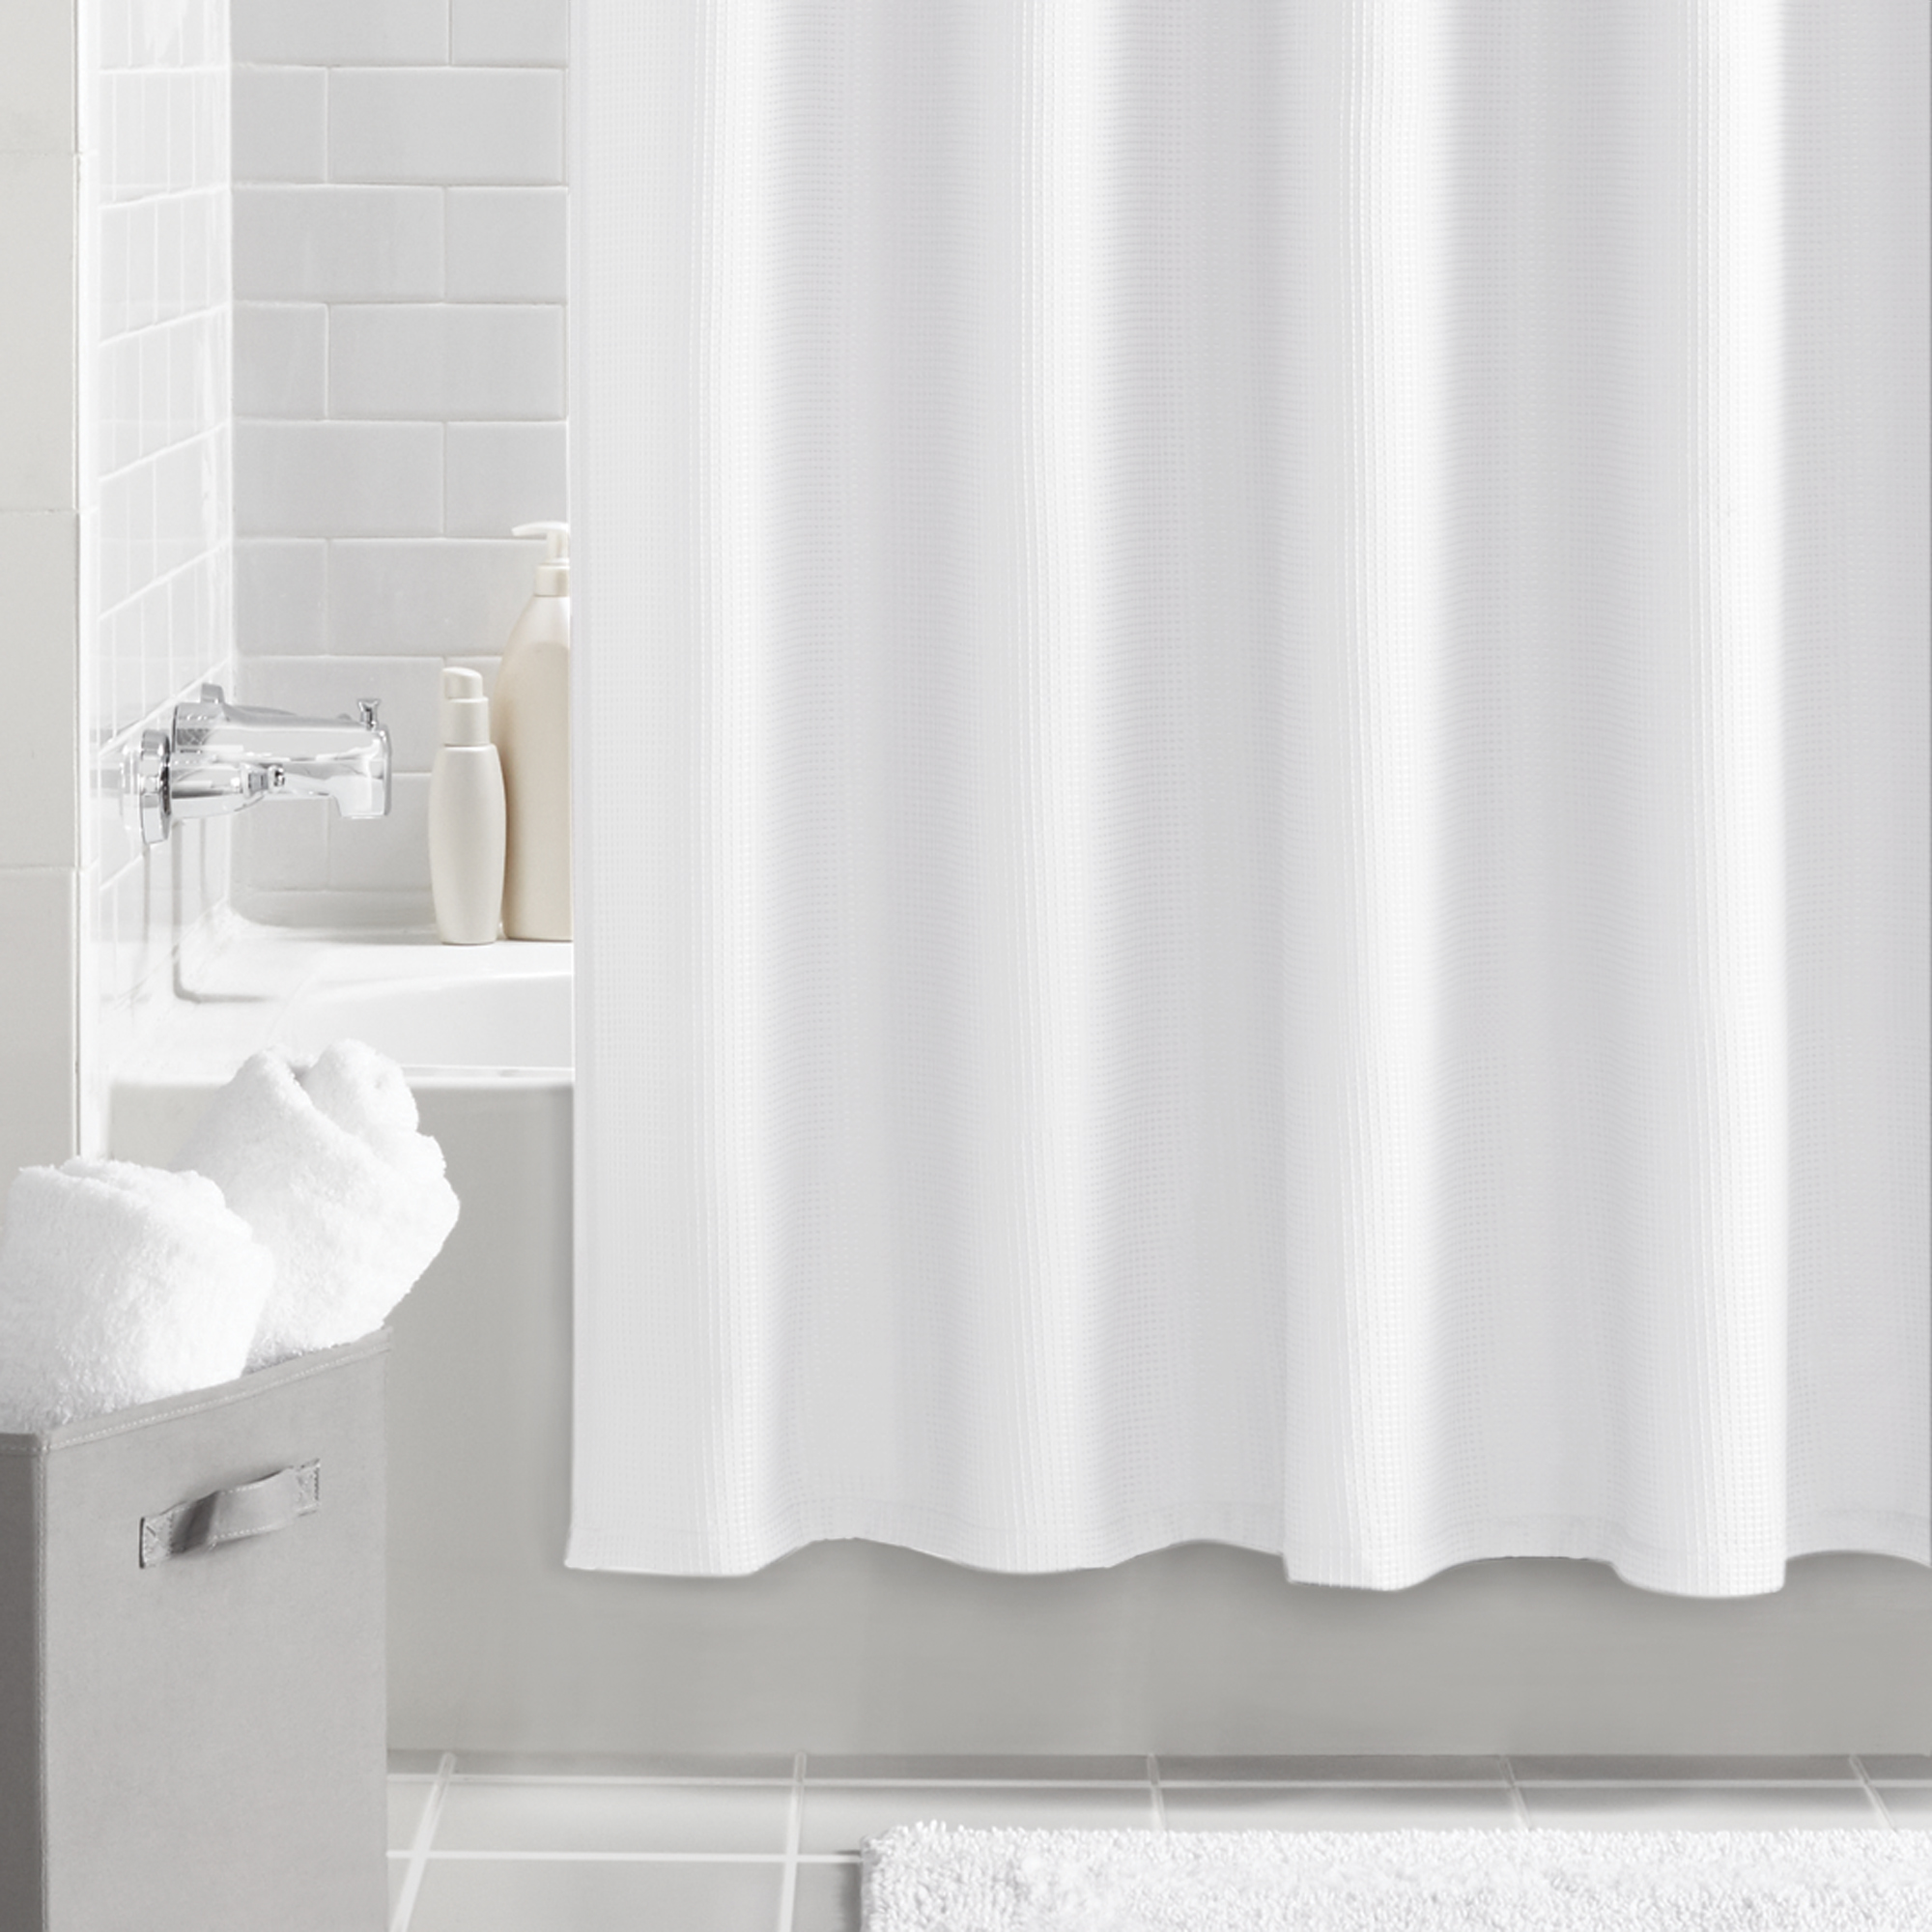 White Fabric Shower Curtain, 70" x 72", Mainstays Classic Waffle Weave Design - image 4 of 5